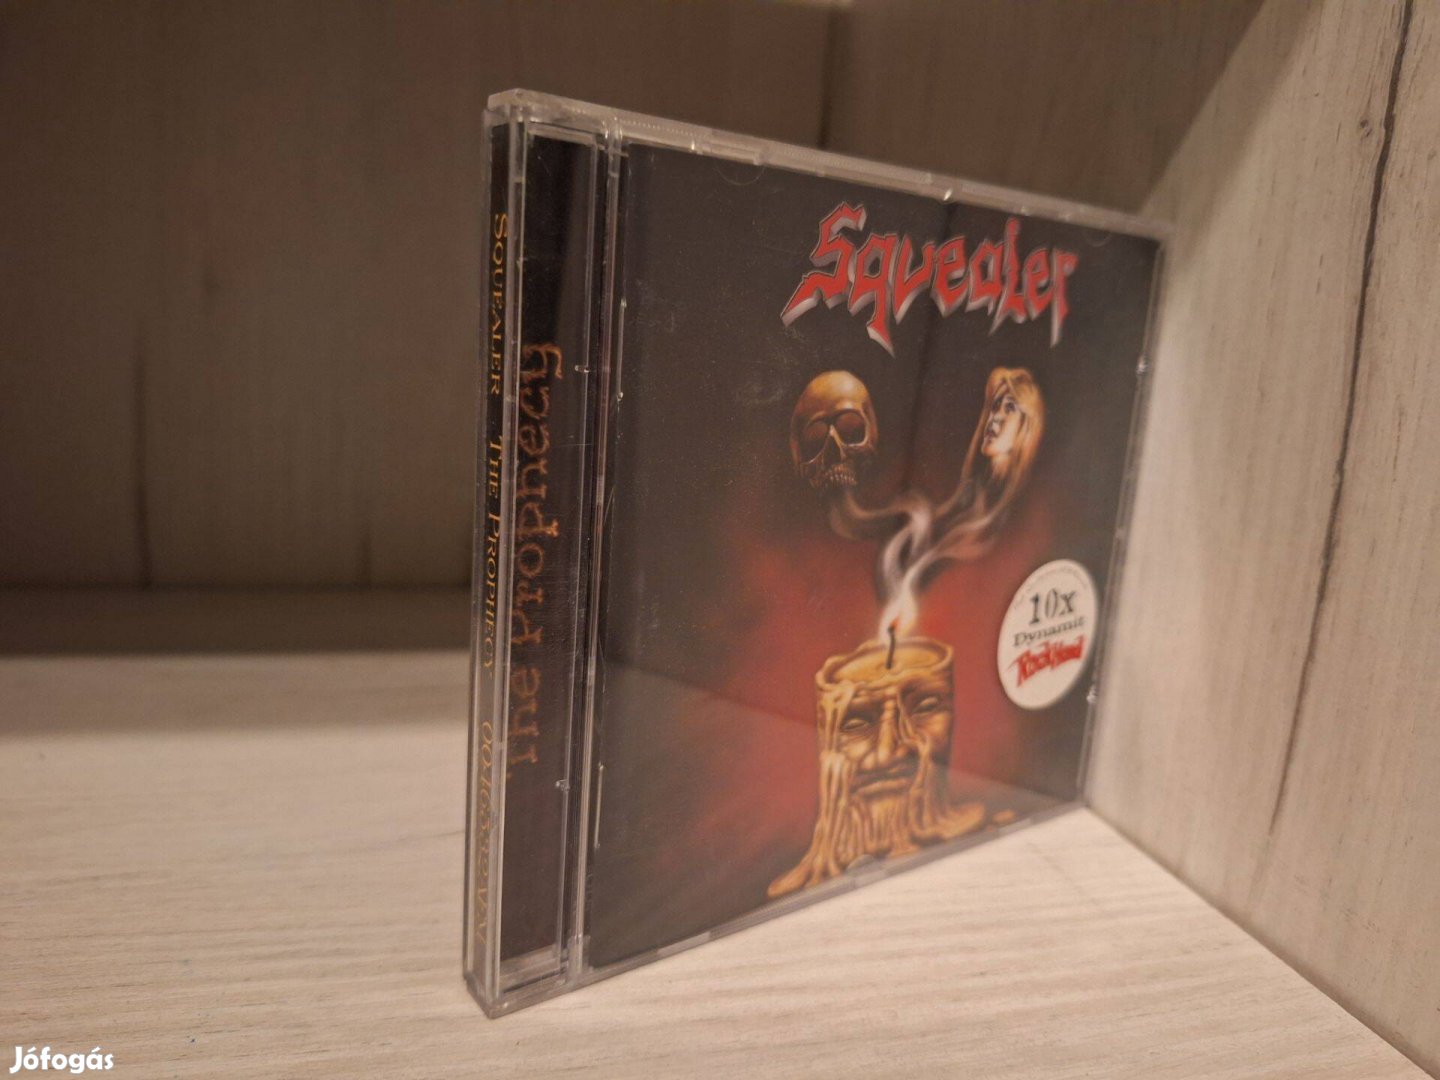 Squealer - The Prophecy CD